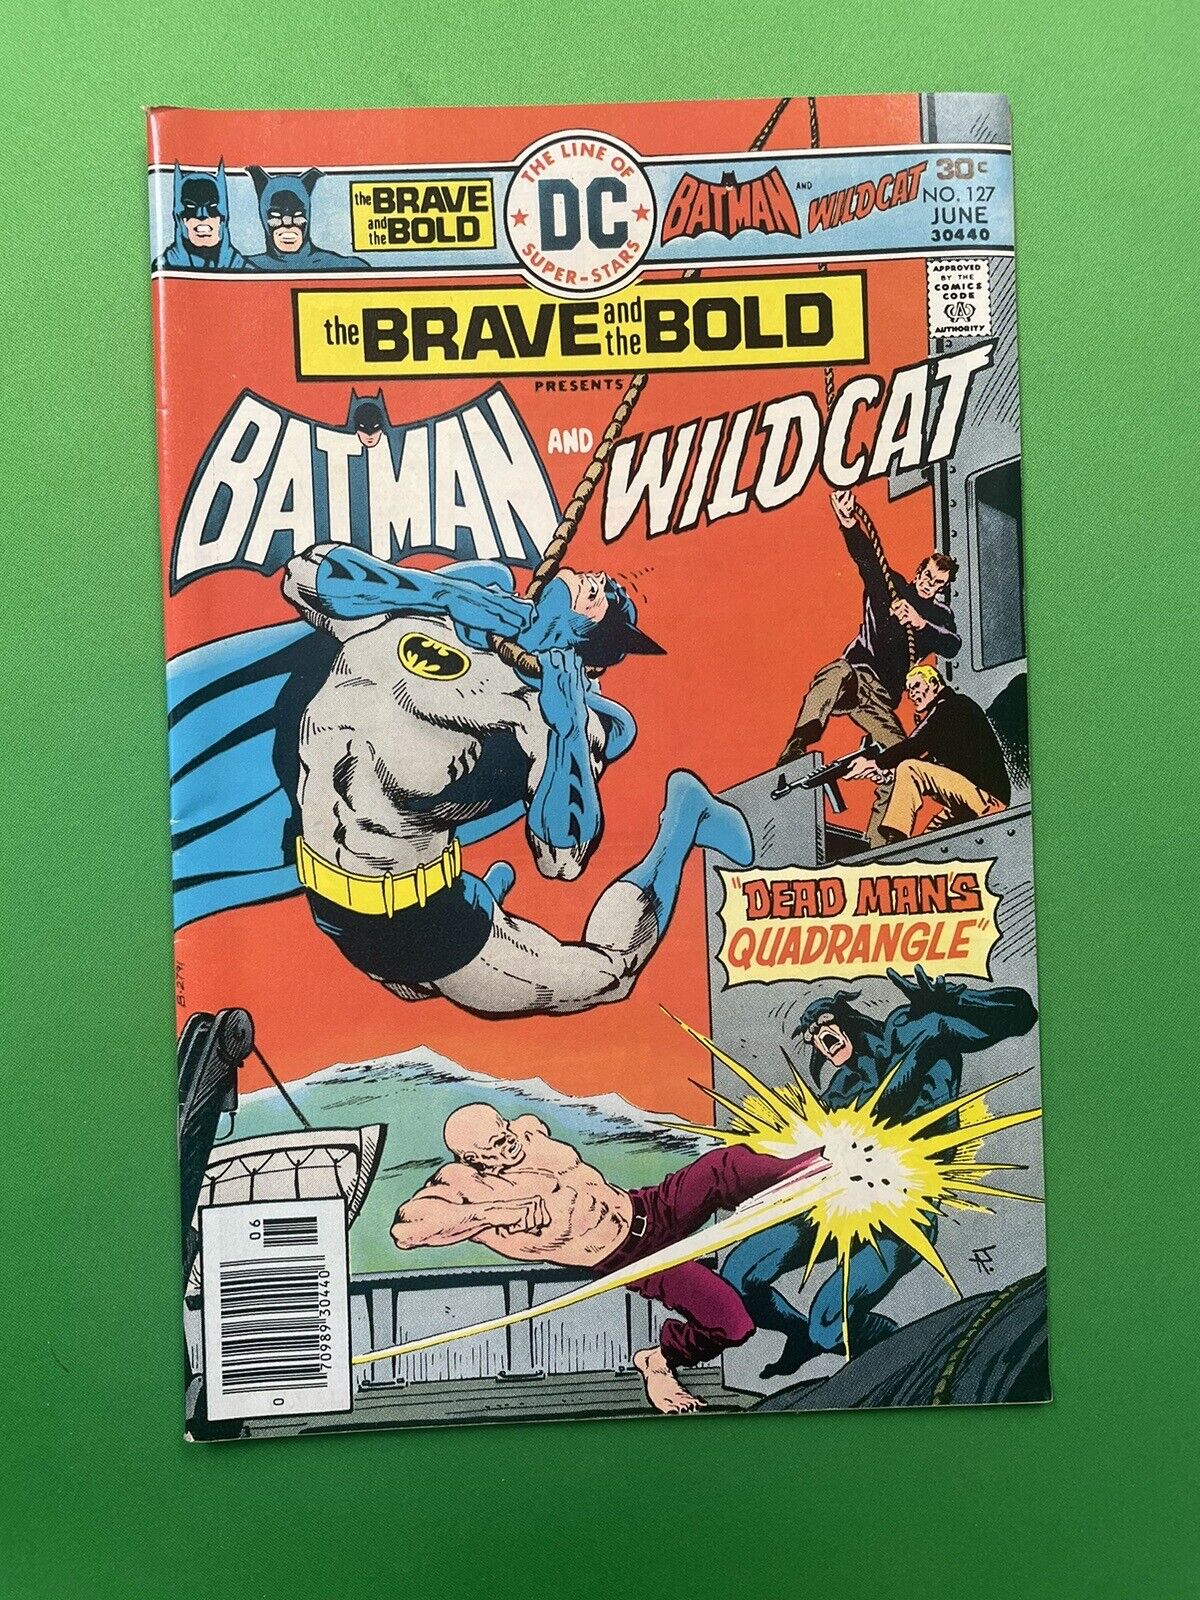 The Brave and the Bold #127, DC Comics JUNE 1976, Batman and Wildcat